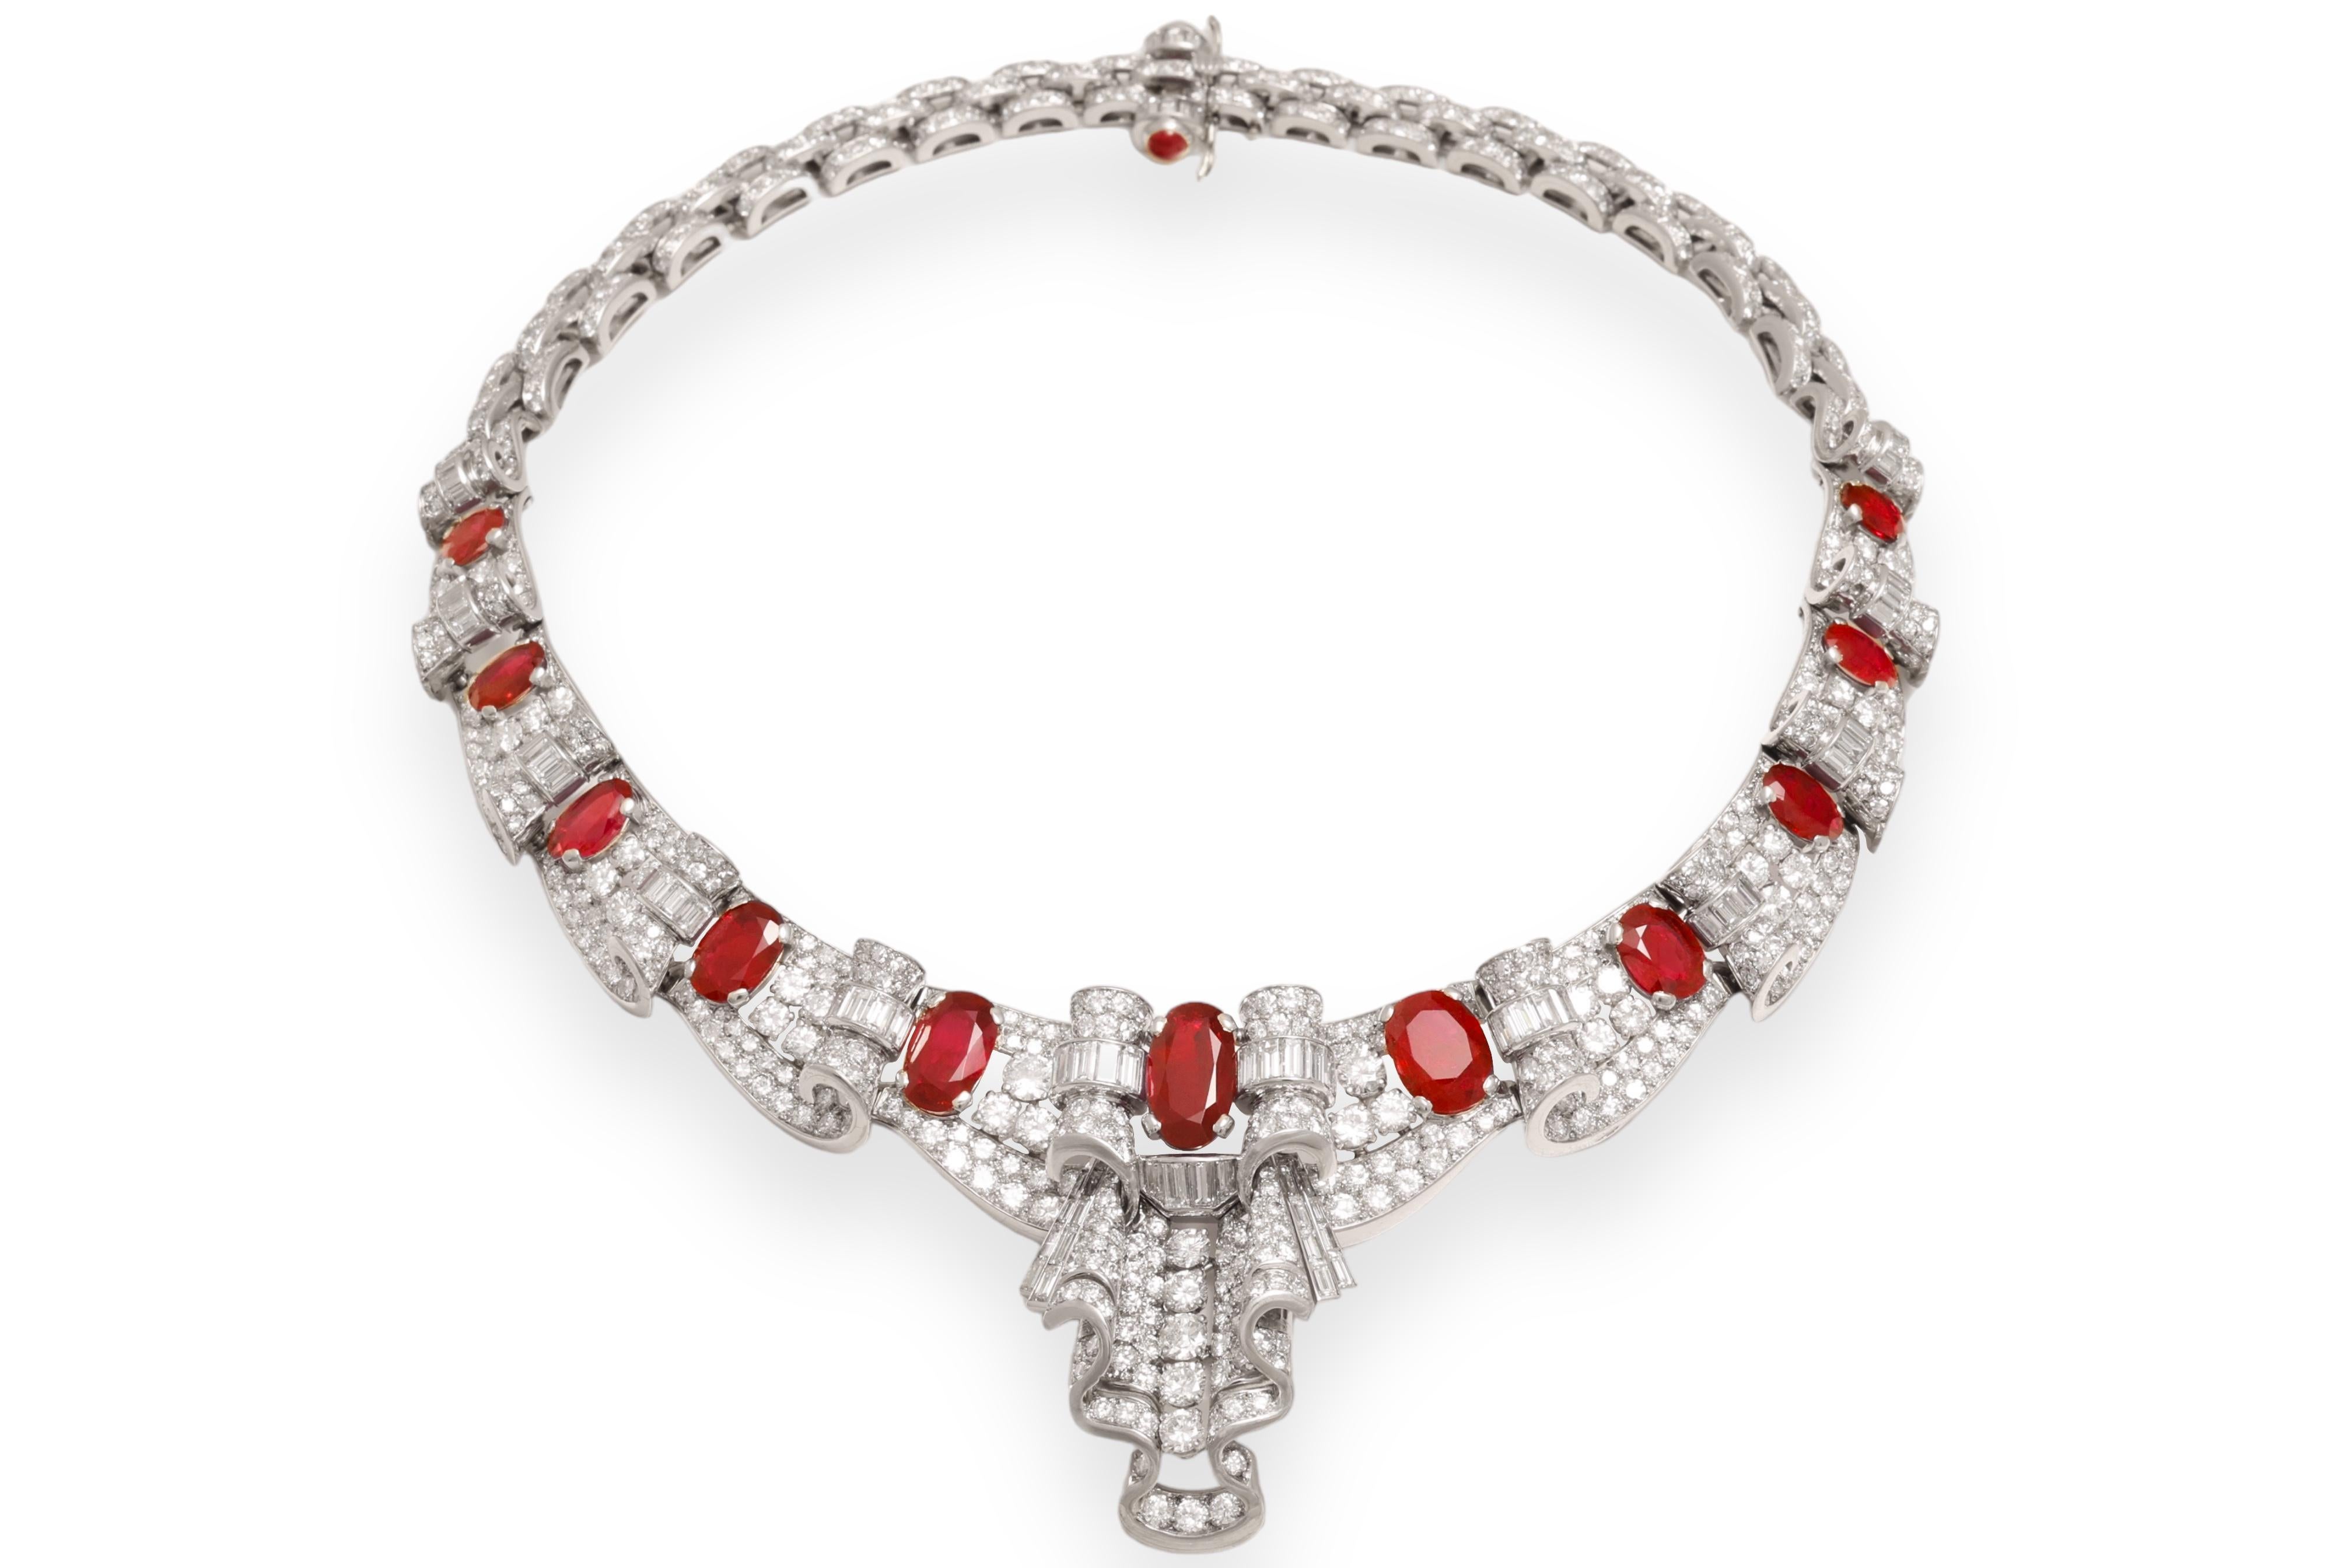 Platinum Burmese 25 Ct Ruby No Heat Necklace to His Majesty Qaboos Bin Said Estate

Qaboos bin Said Al Said was Sultan of Oman from 23 July 1970 until his death in 2020

Completely hand crafted ,a real work of art !

Diamonds : Brilliant cut